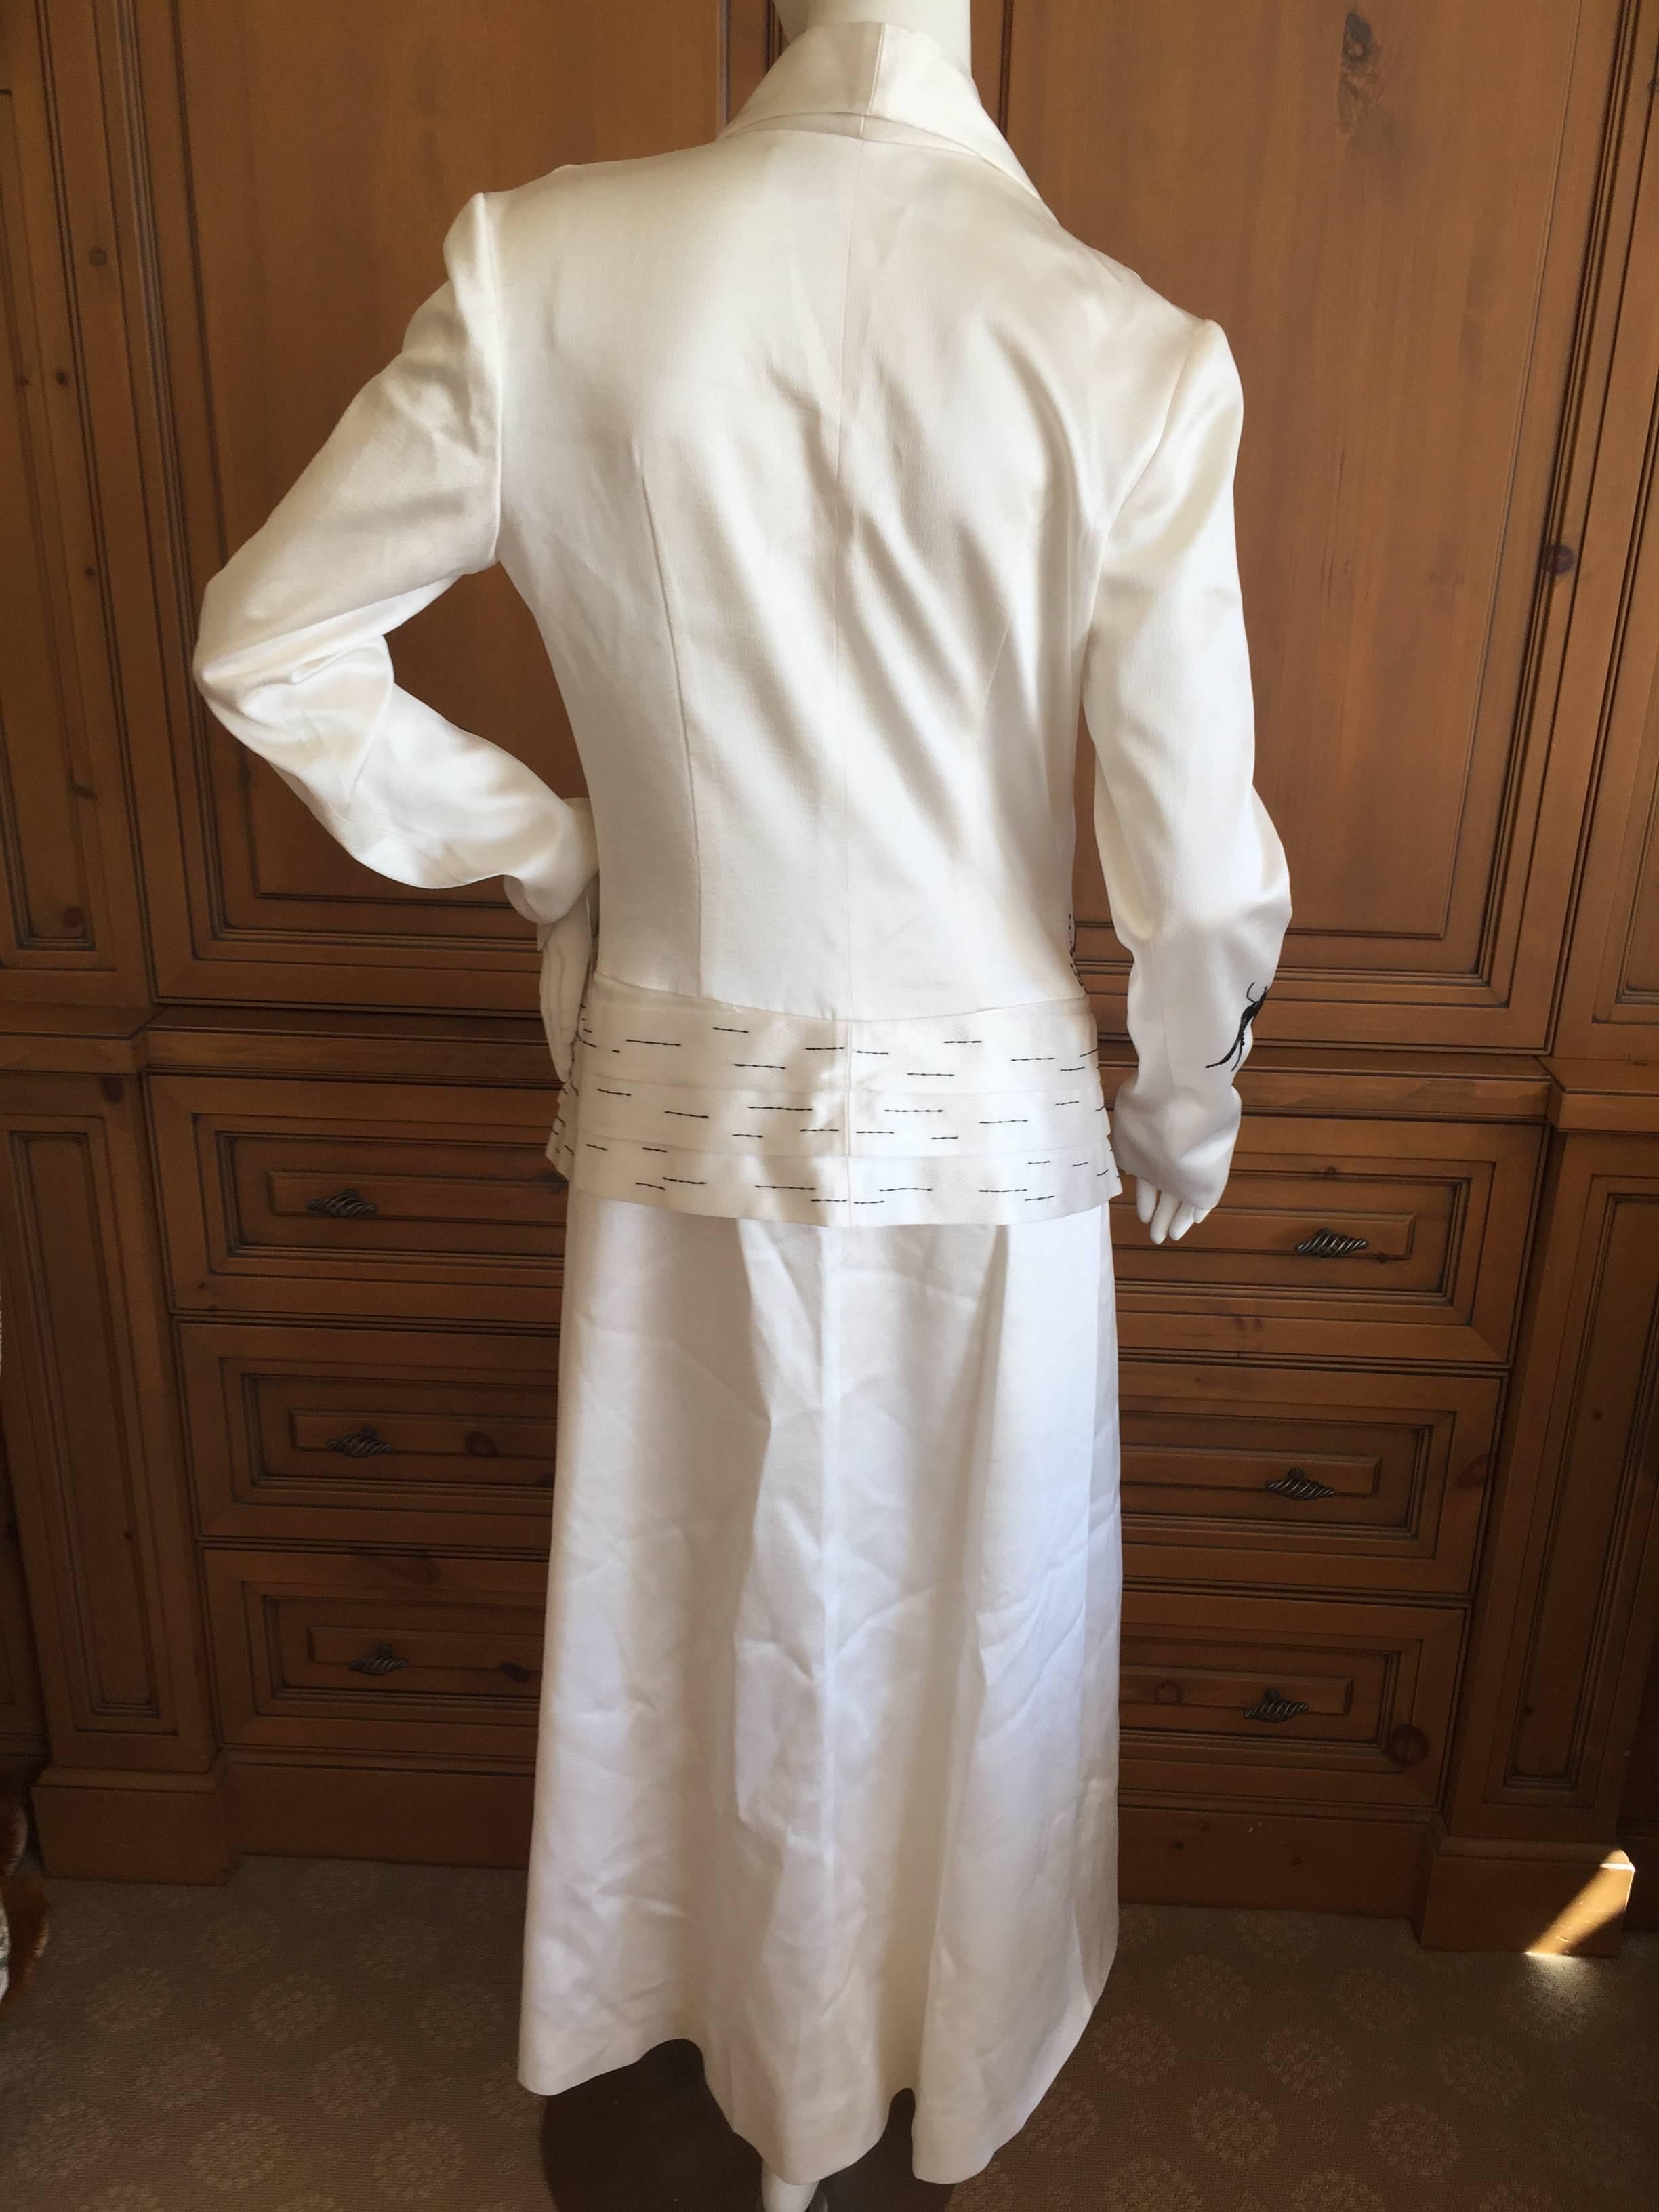 Women's Christian Dior by Gianfranco Ferre White Hammered Silk Beaded Evening Coat For Sale